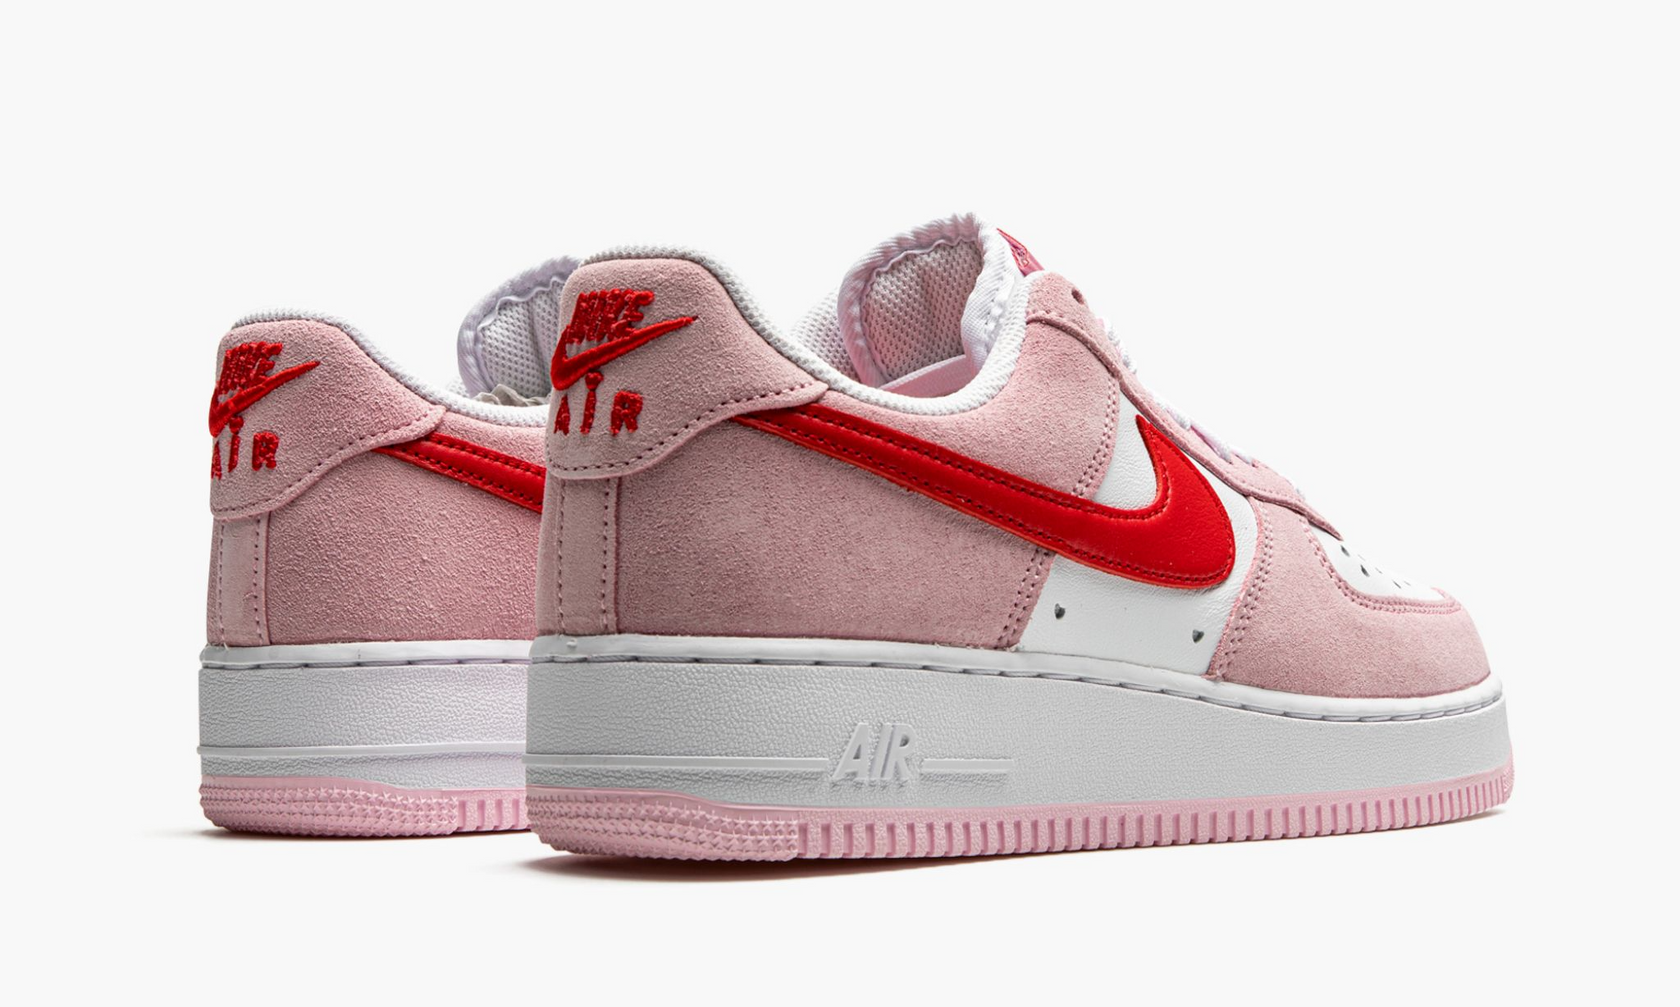 Nike Air Force 1 Low “Valentine’s Day” 2023. Nike Air Force 1 Low Valentines Day. Кроссовки Nike Air Force 1 Low Valentine's Day. Nike Air Force 1 Low 07 Valentine's Day. Air force 1 low valentine s day